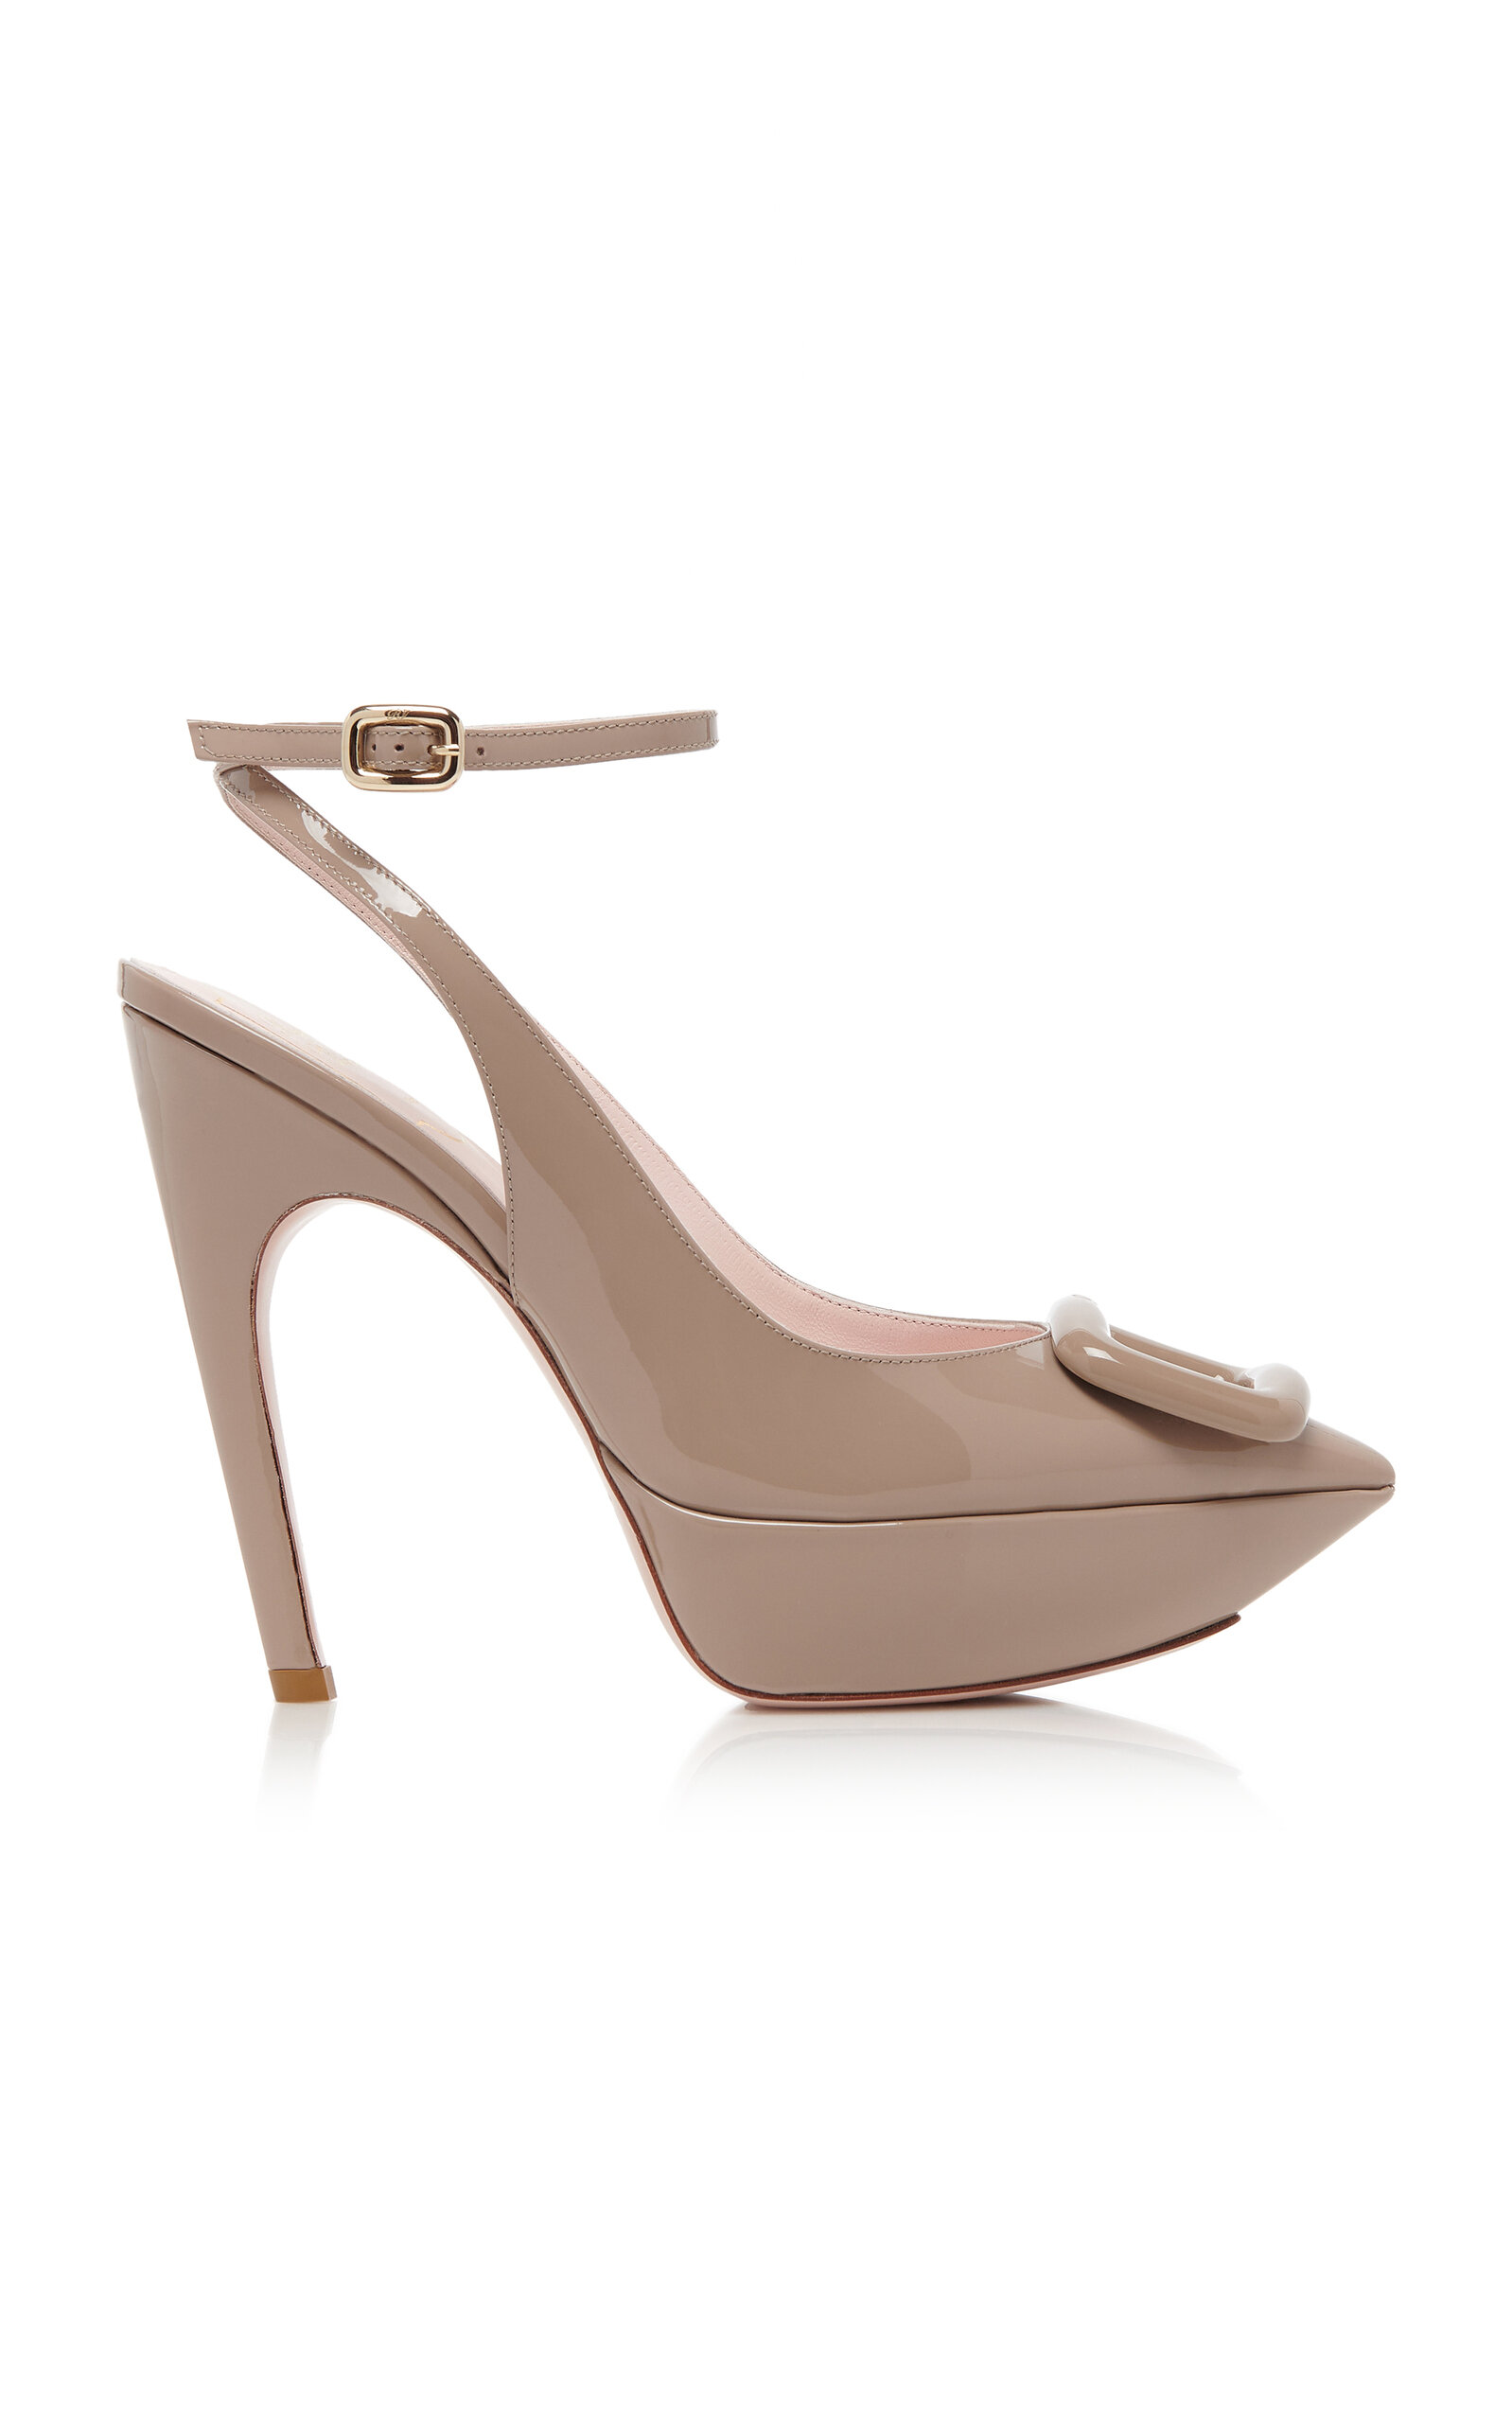 Roger Vivier Choc Buckled Patent Leather Pumps In Neutral